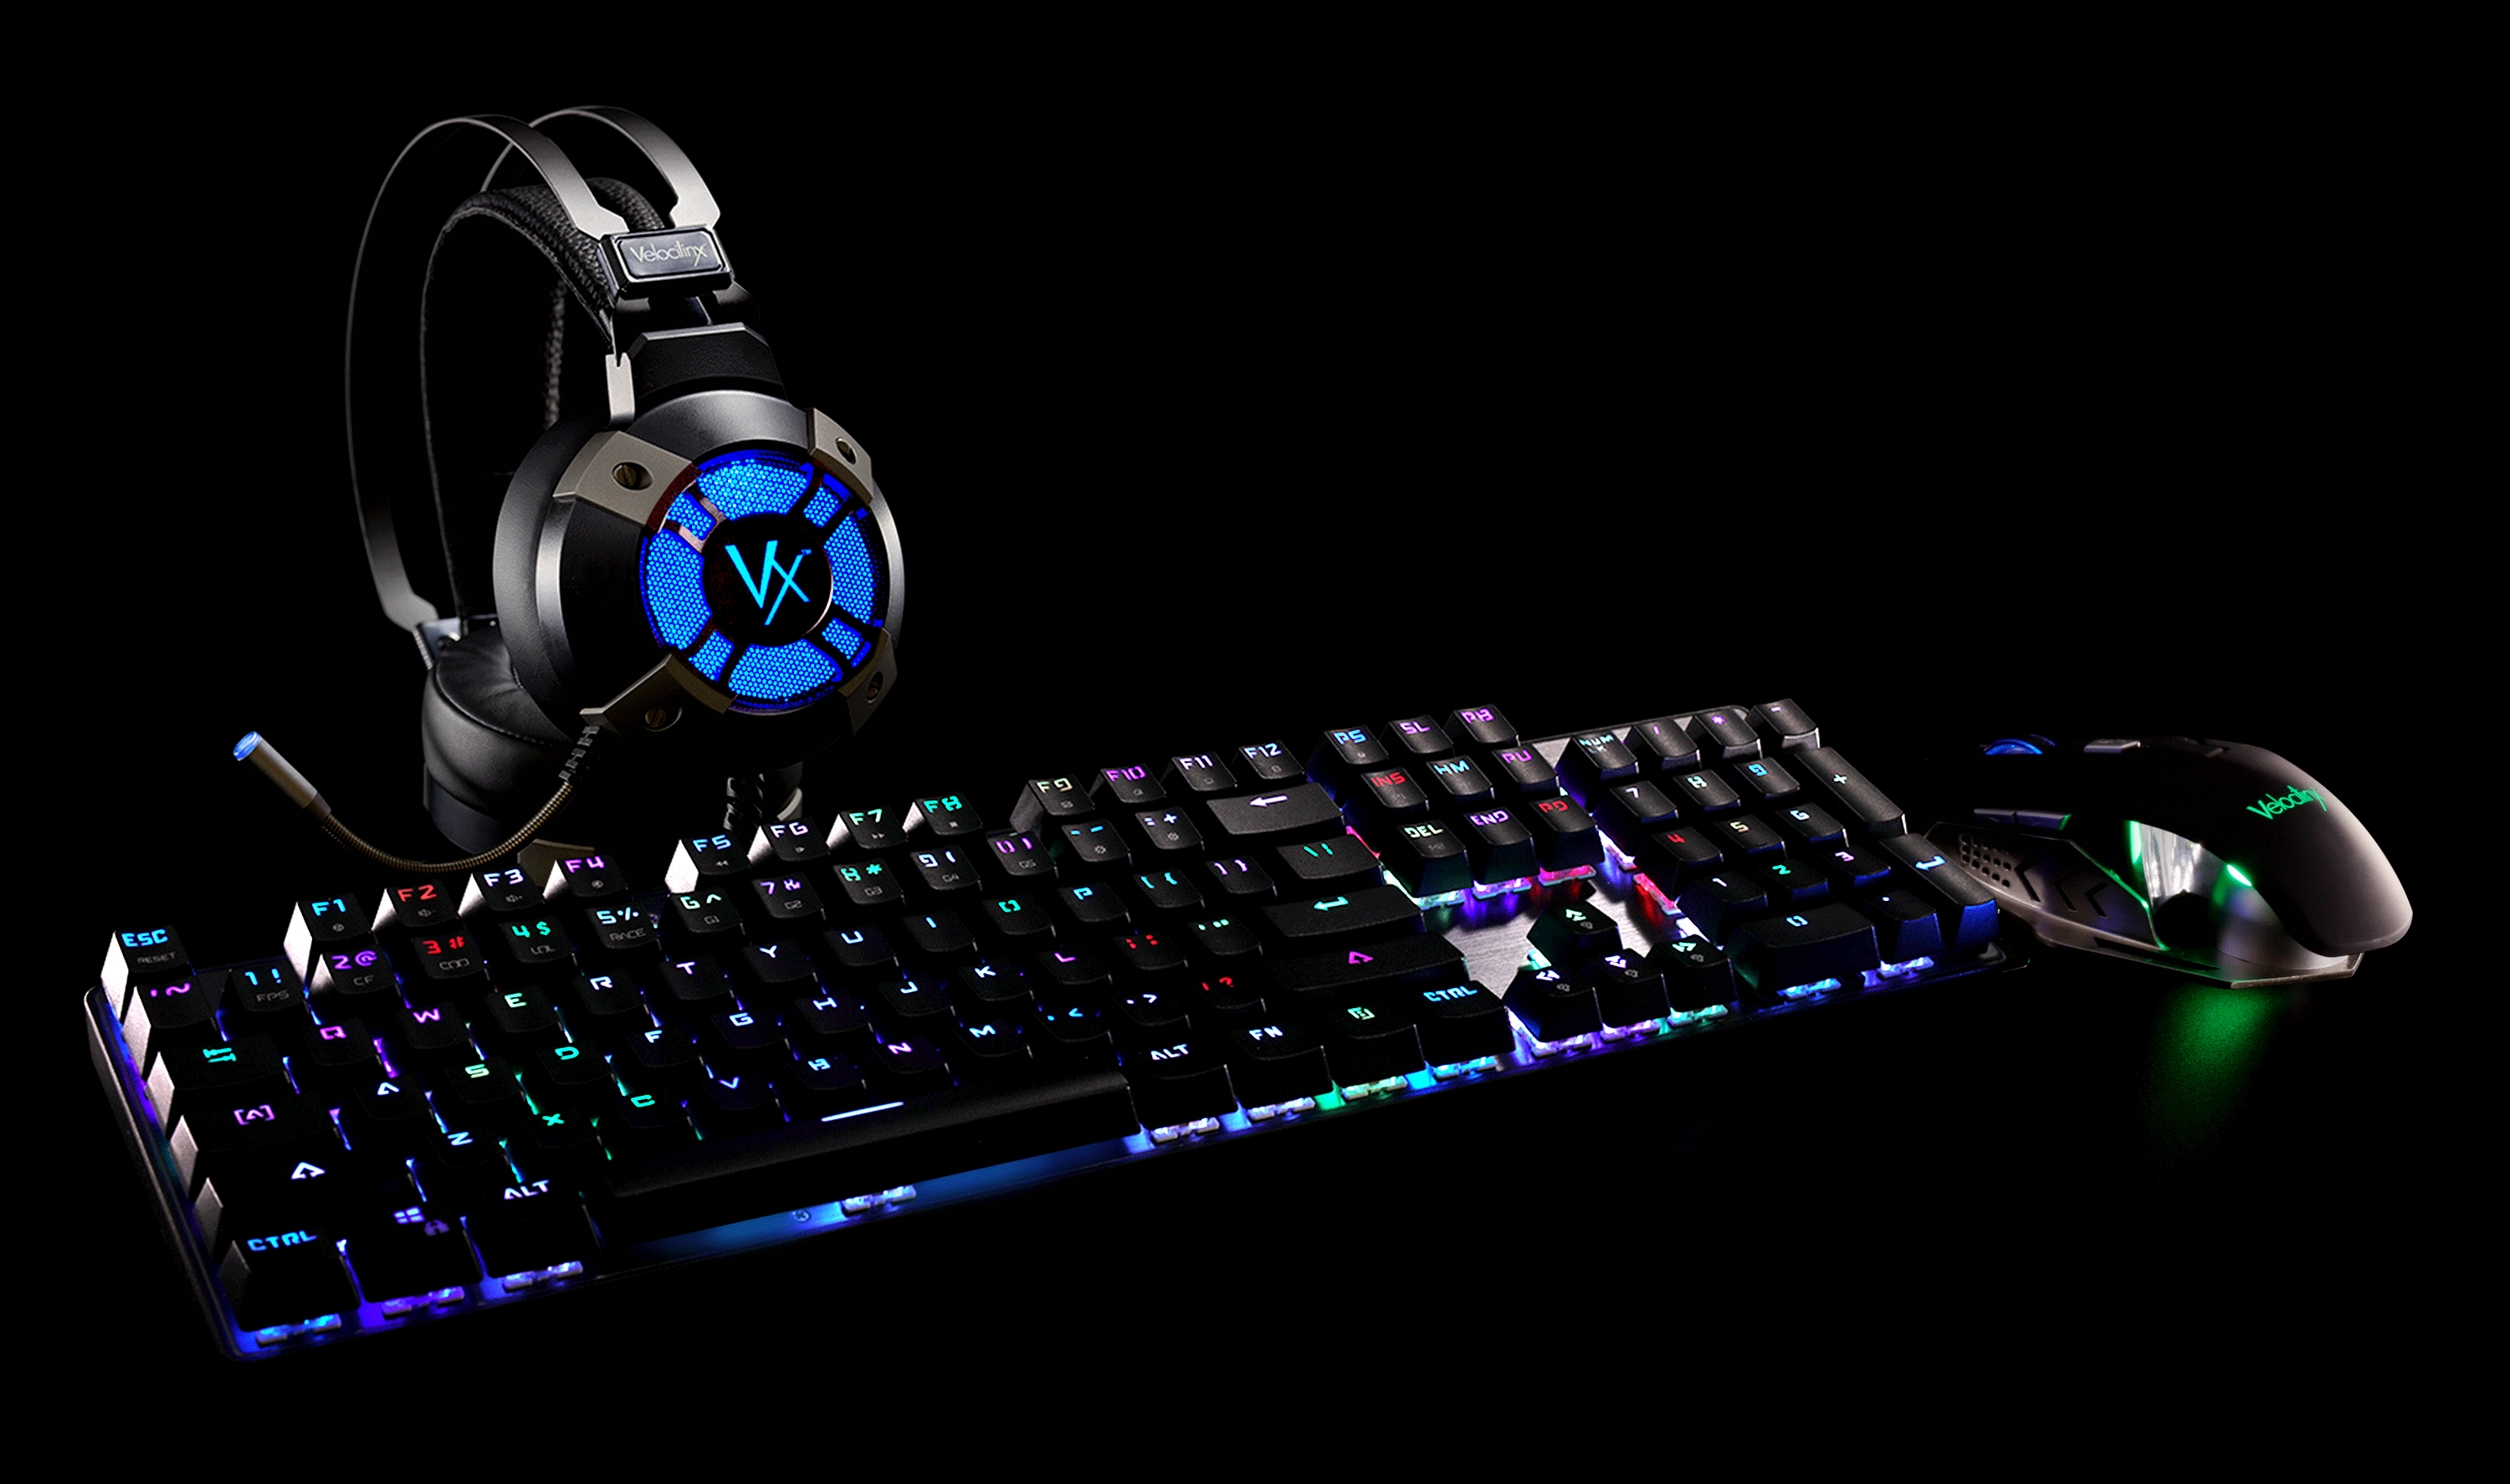 Brennus headset, keyboard and mouse